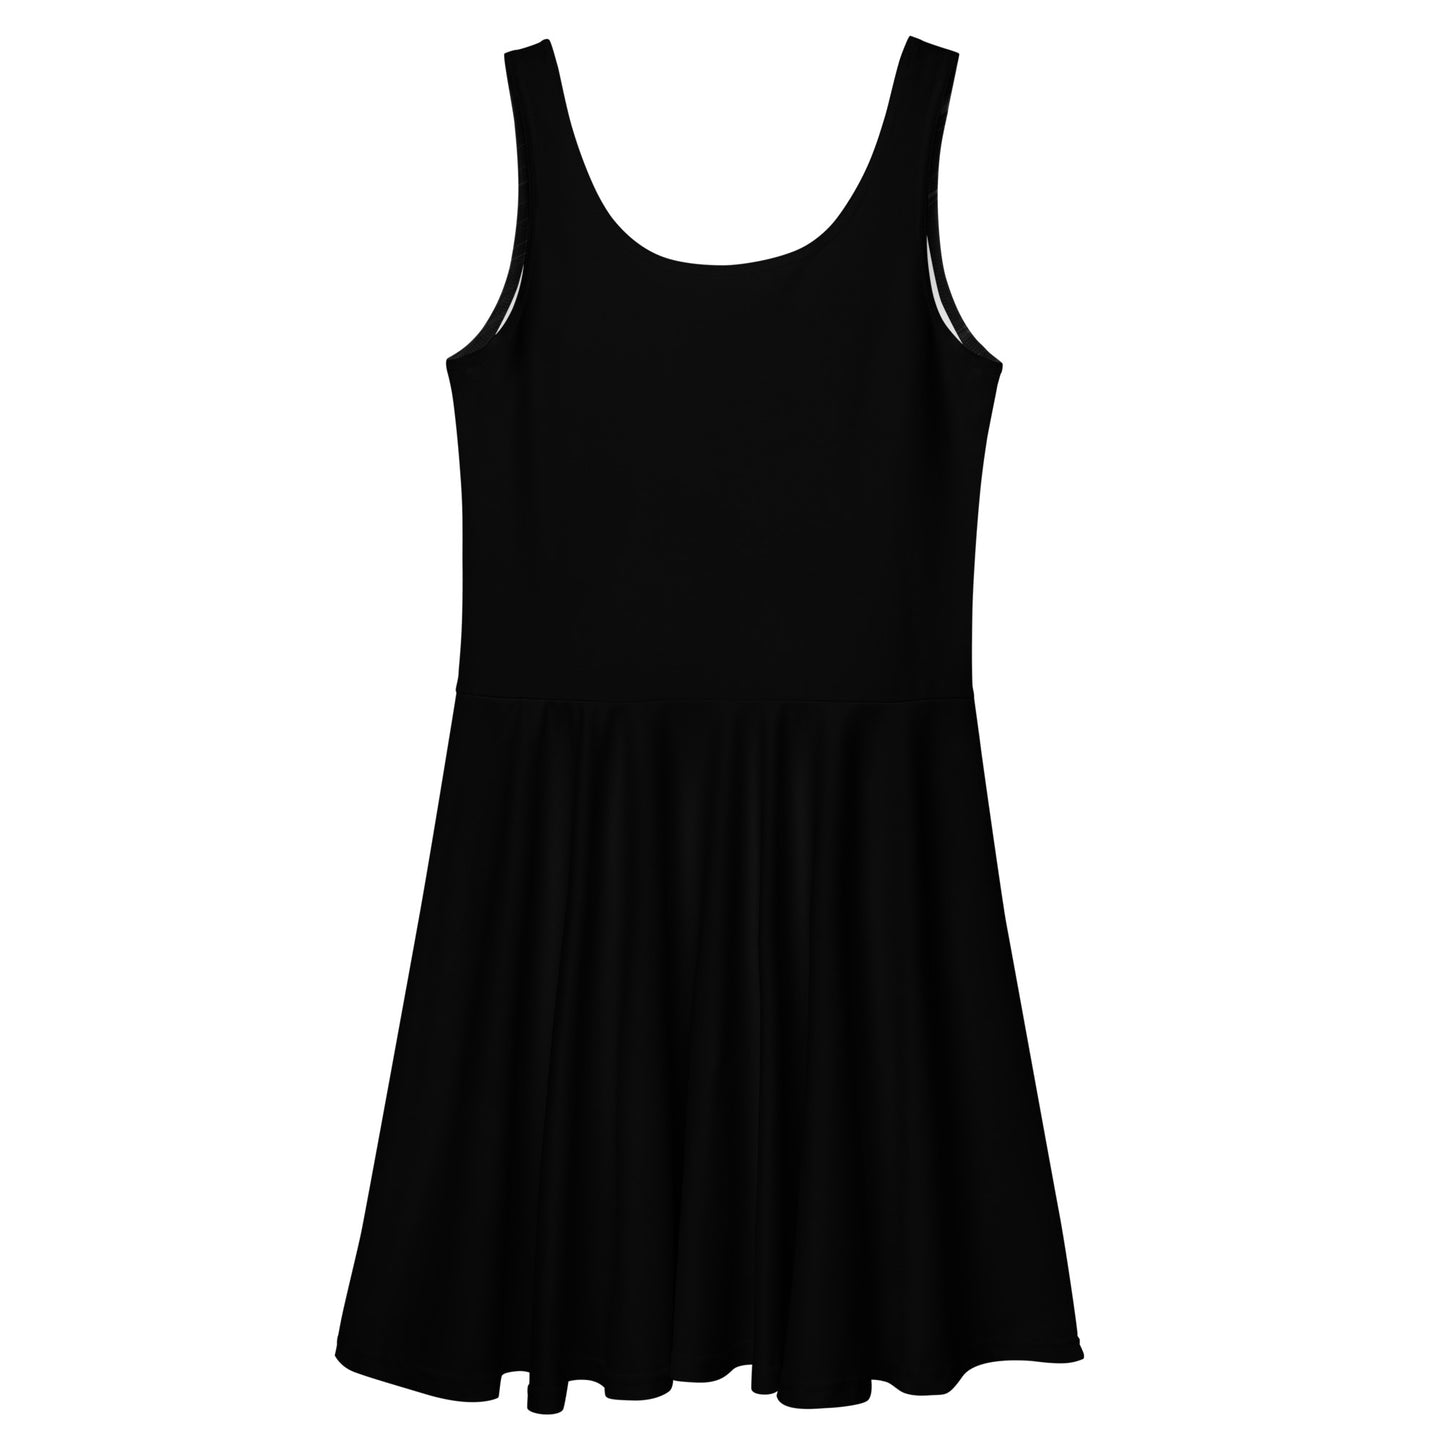 Cotton Tee Dress Mini, Breathable Thick and Soft Woven Cotton, Cozy Layering Dream Skater Dress